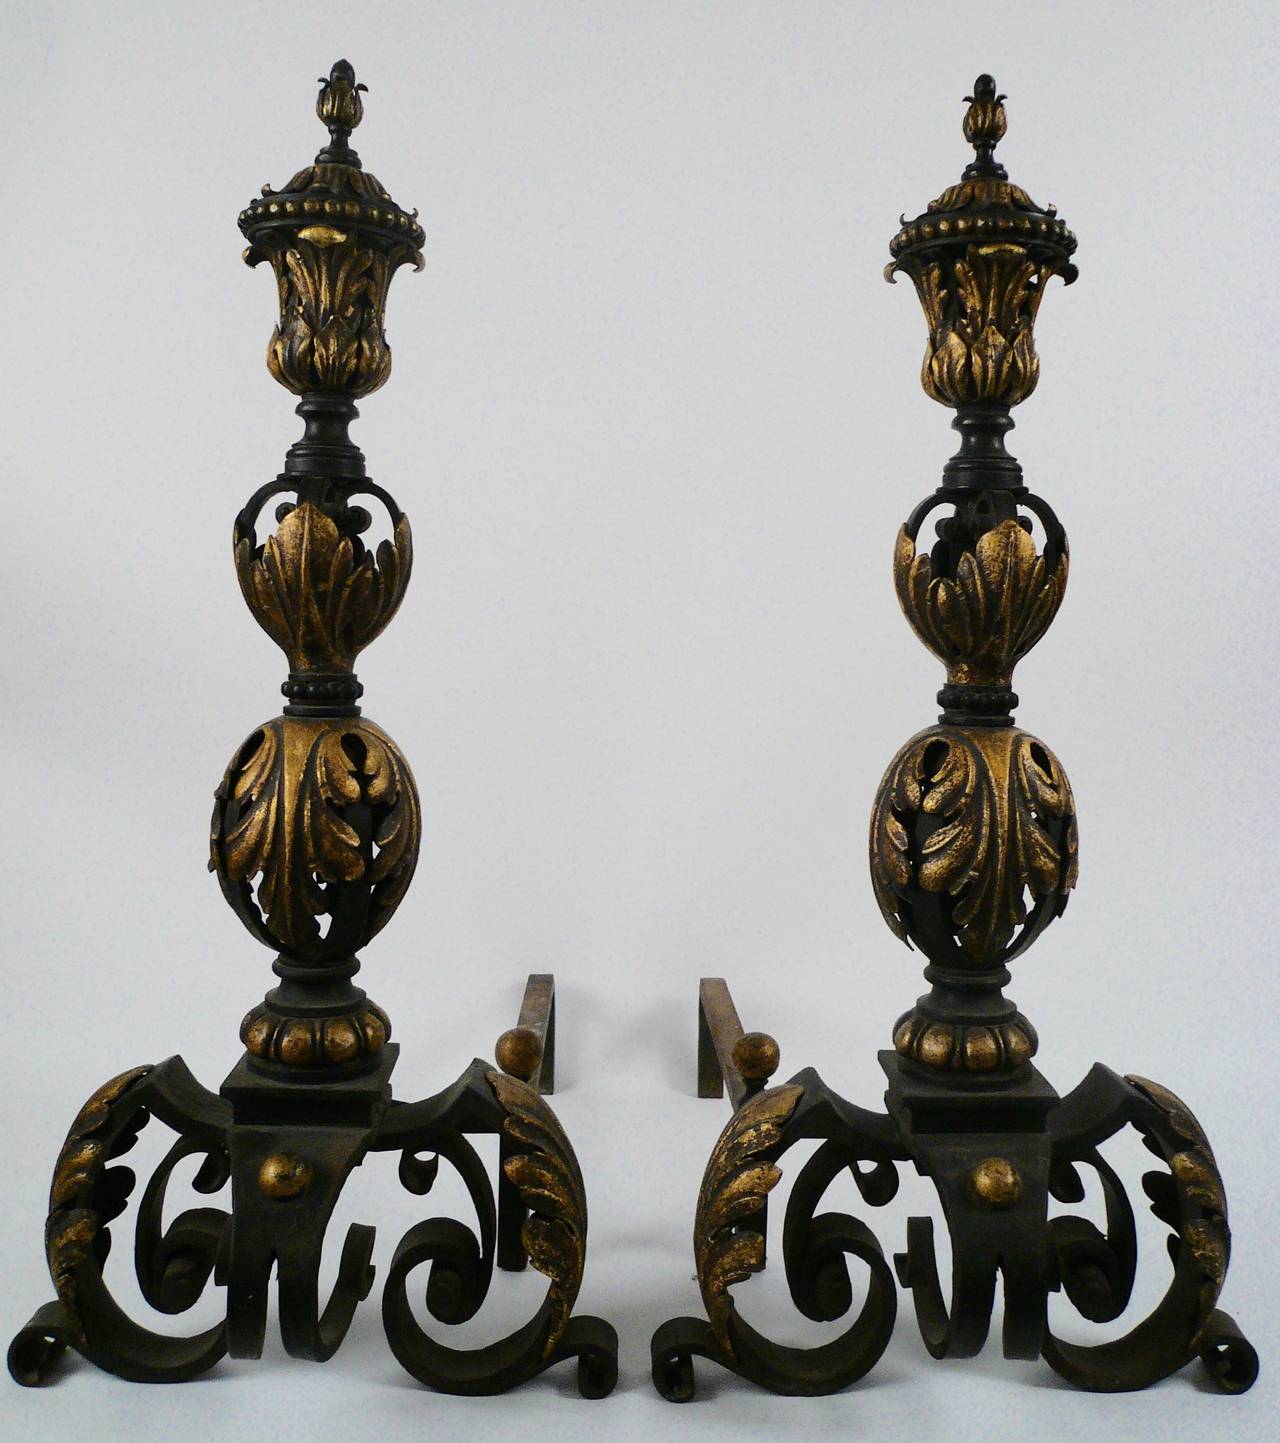 Impressive pair of very heavy gauge wrought iron andirons of baronial proportion.